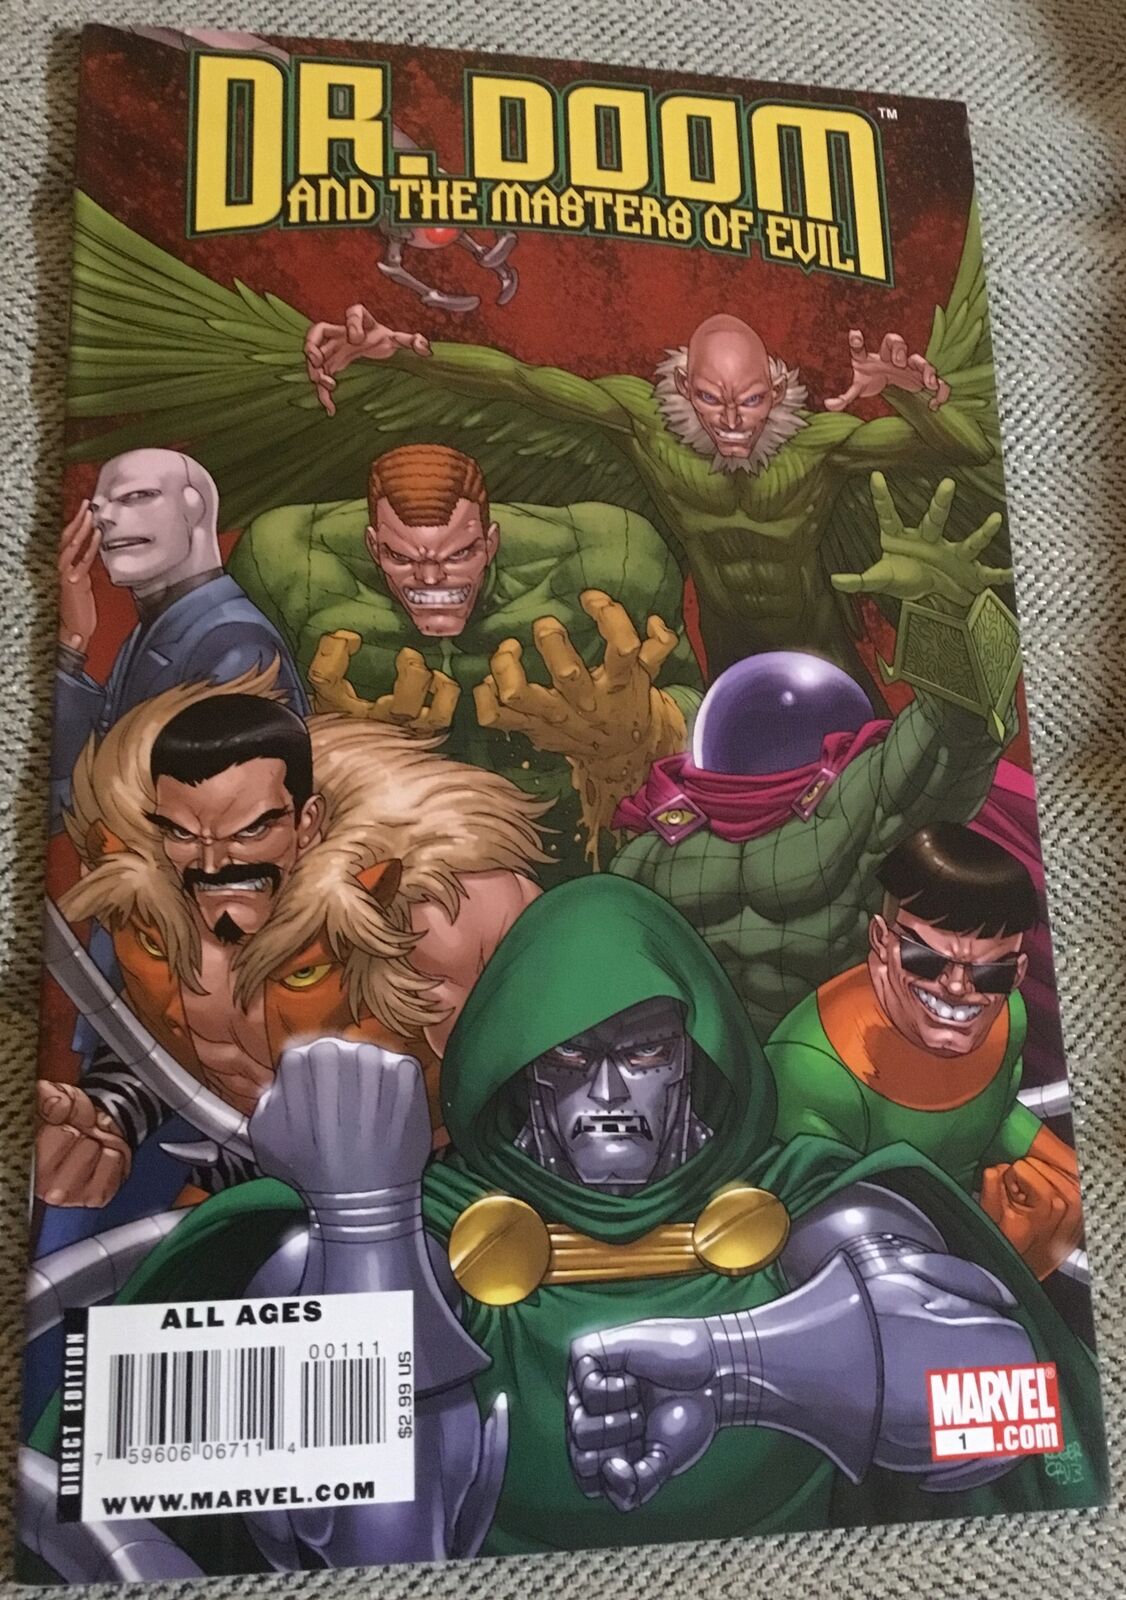 Dr. Doom and the Masters of Evil #1 (Sinister Six Marvel) Very Nice Unread?